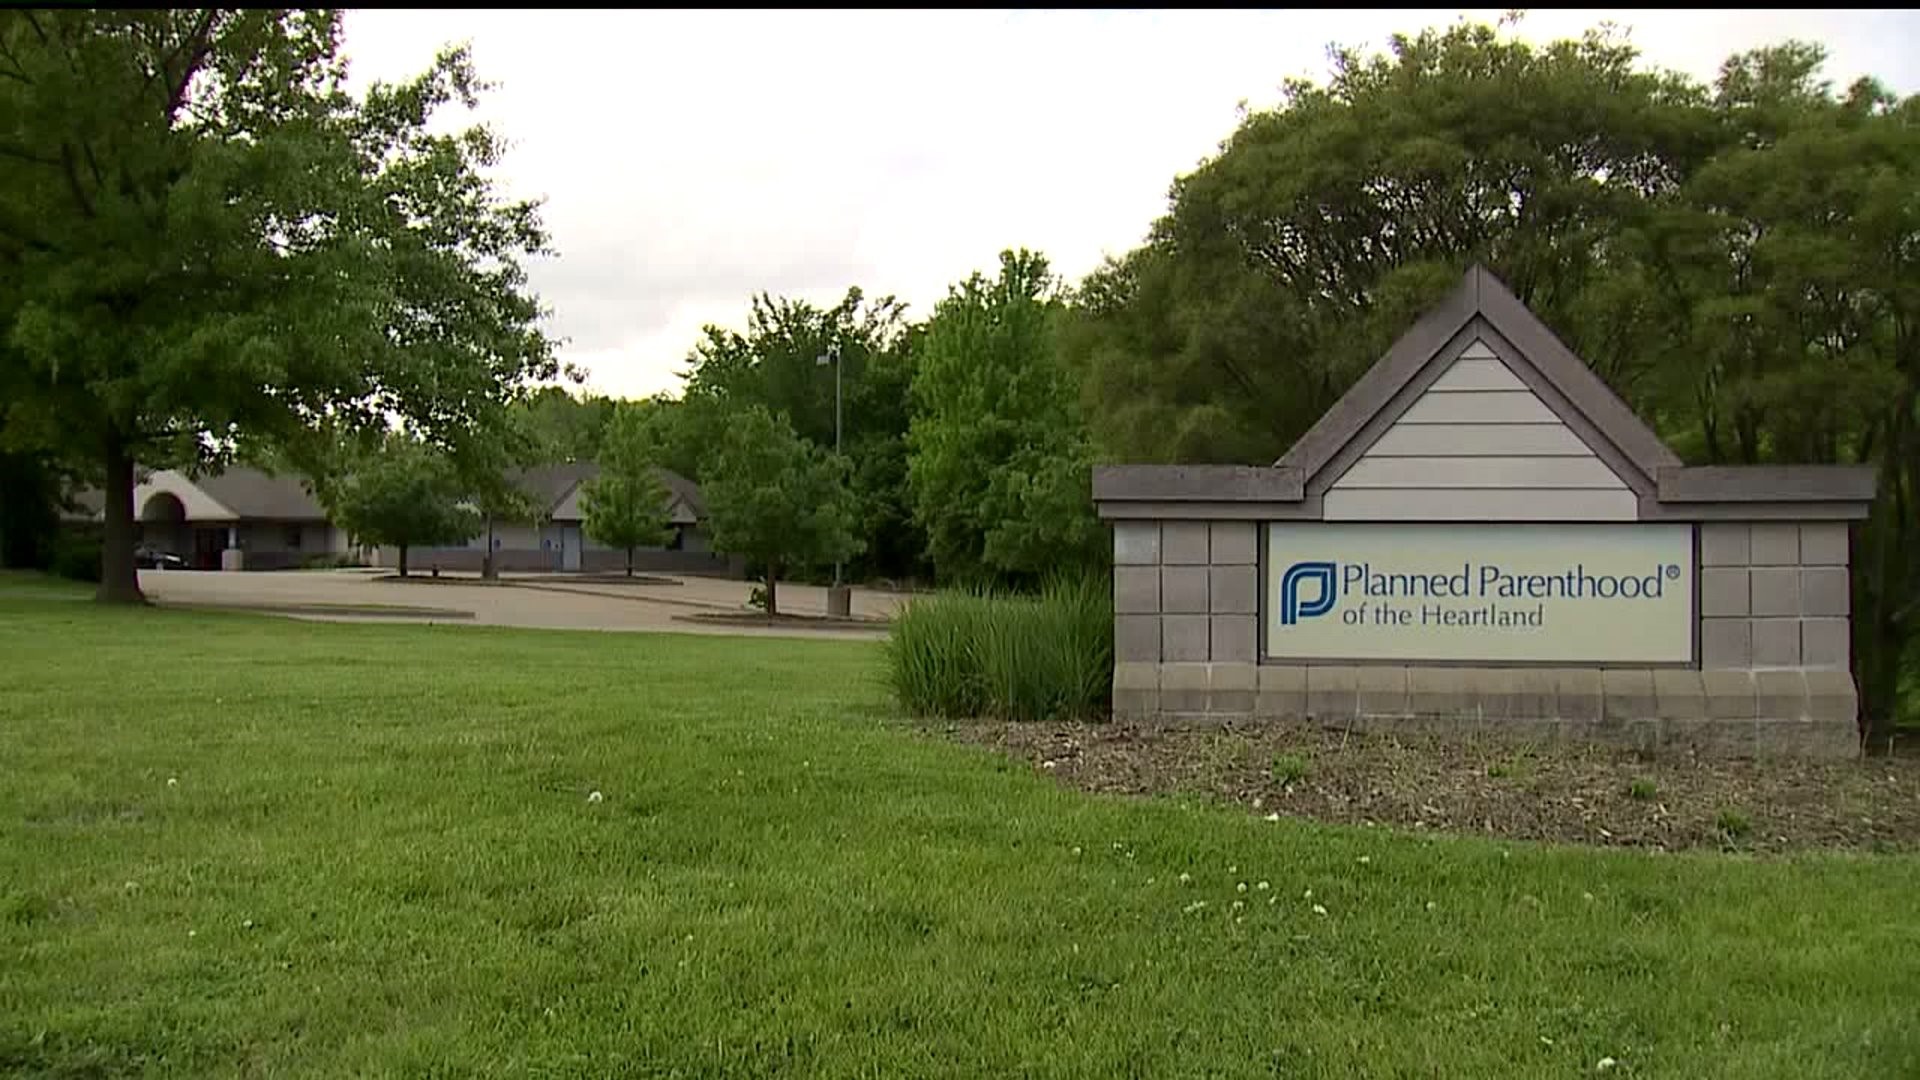 Planned Parenthood of the Heartland